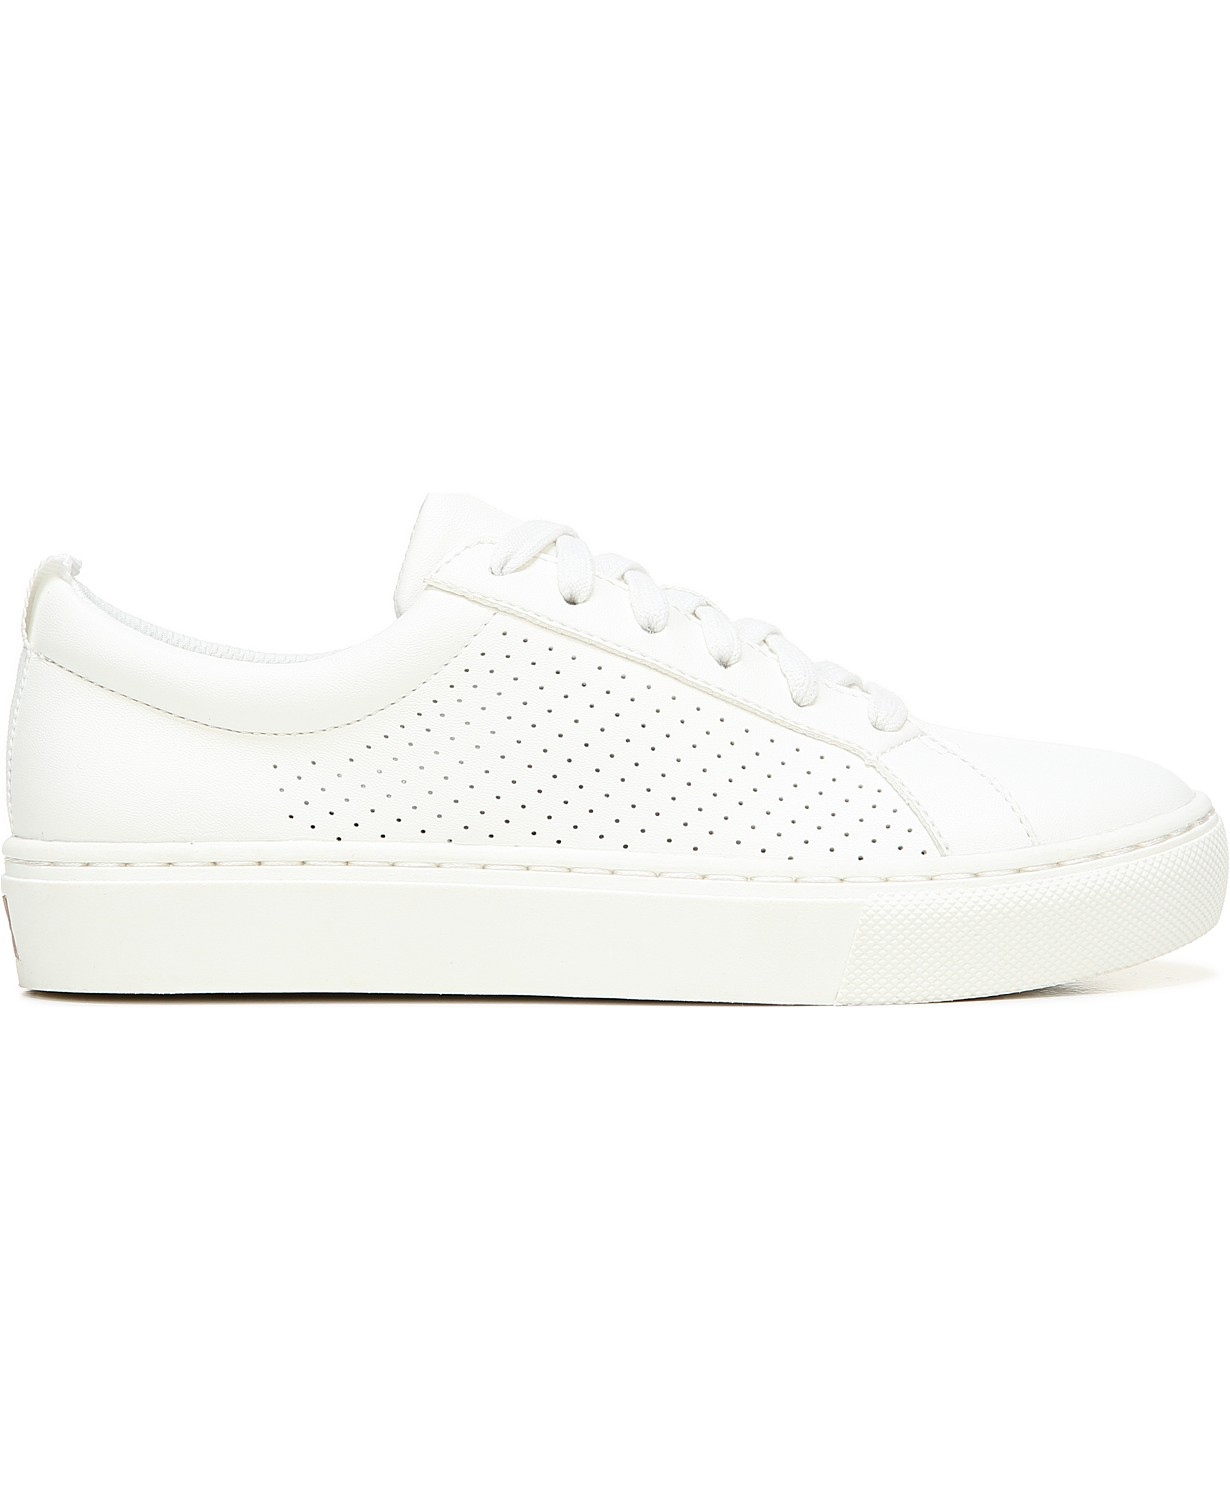 www.couturepoint.com-kate-spade-new-york-womens-off-white-kaia-sneakers-copy